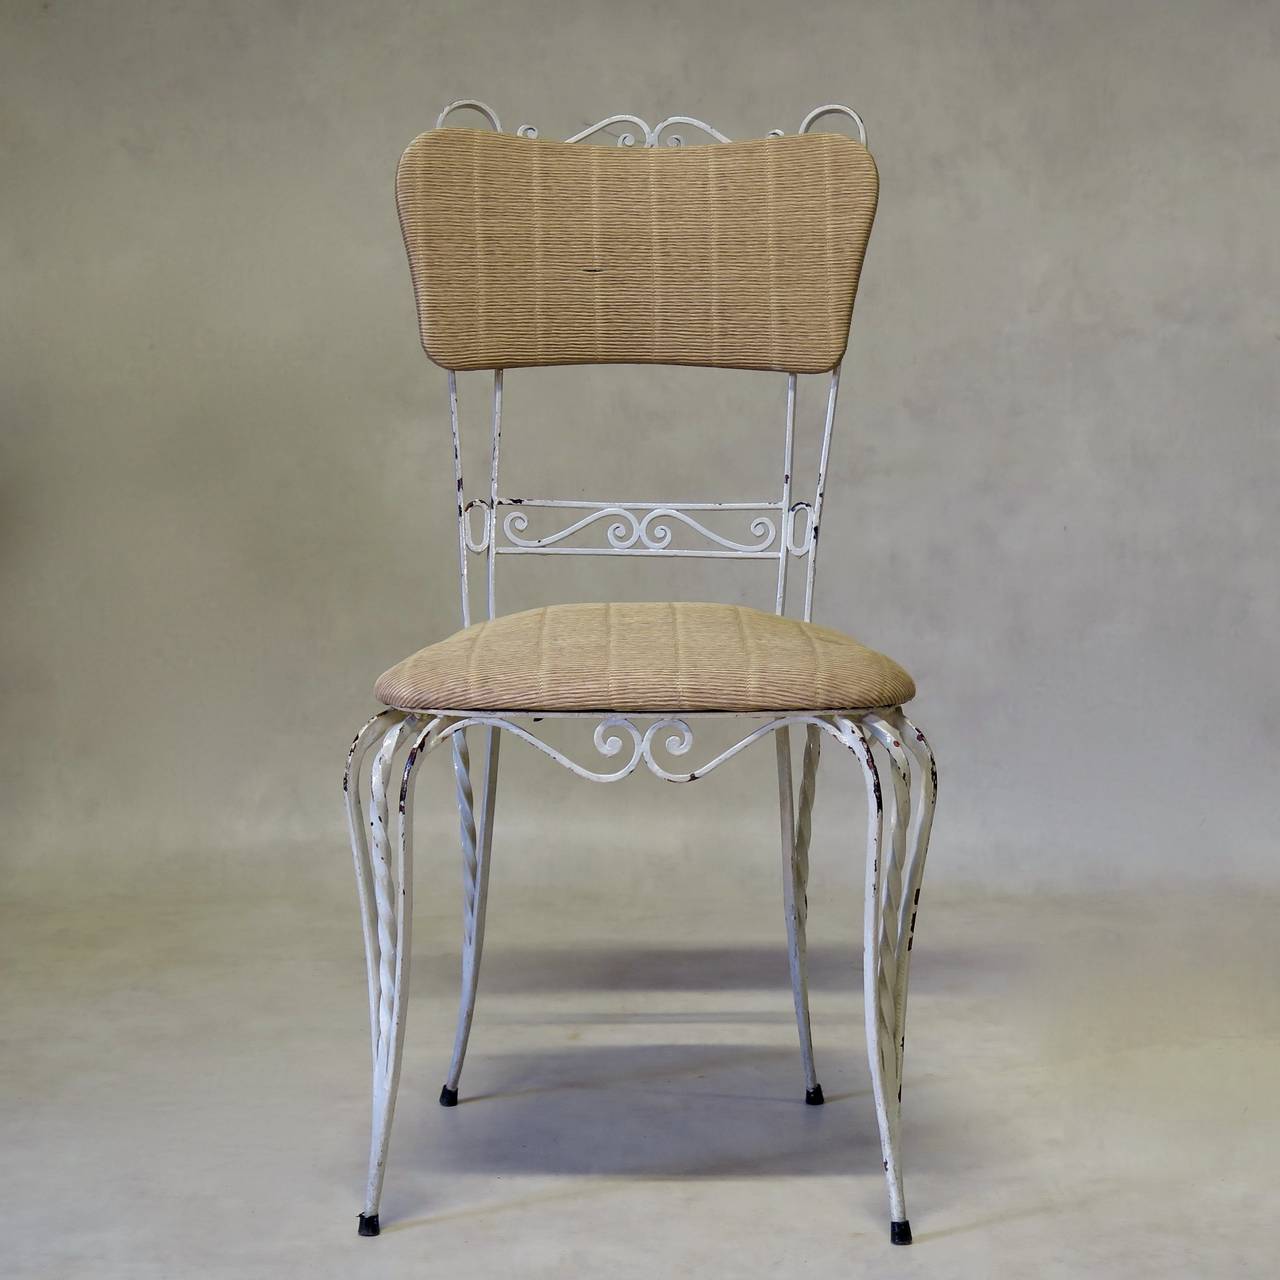 Charming set of three wrought iron chairs, the seats and backs upholstered in textured faux-straw vinyl.